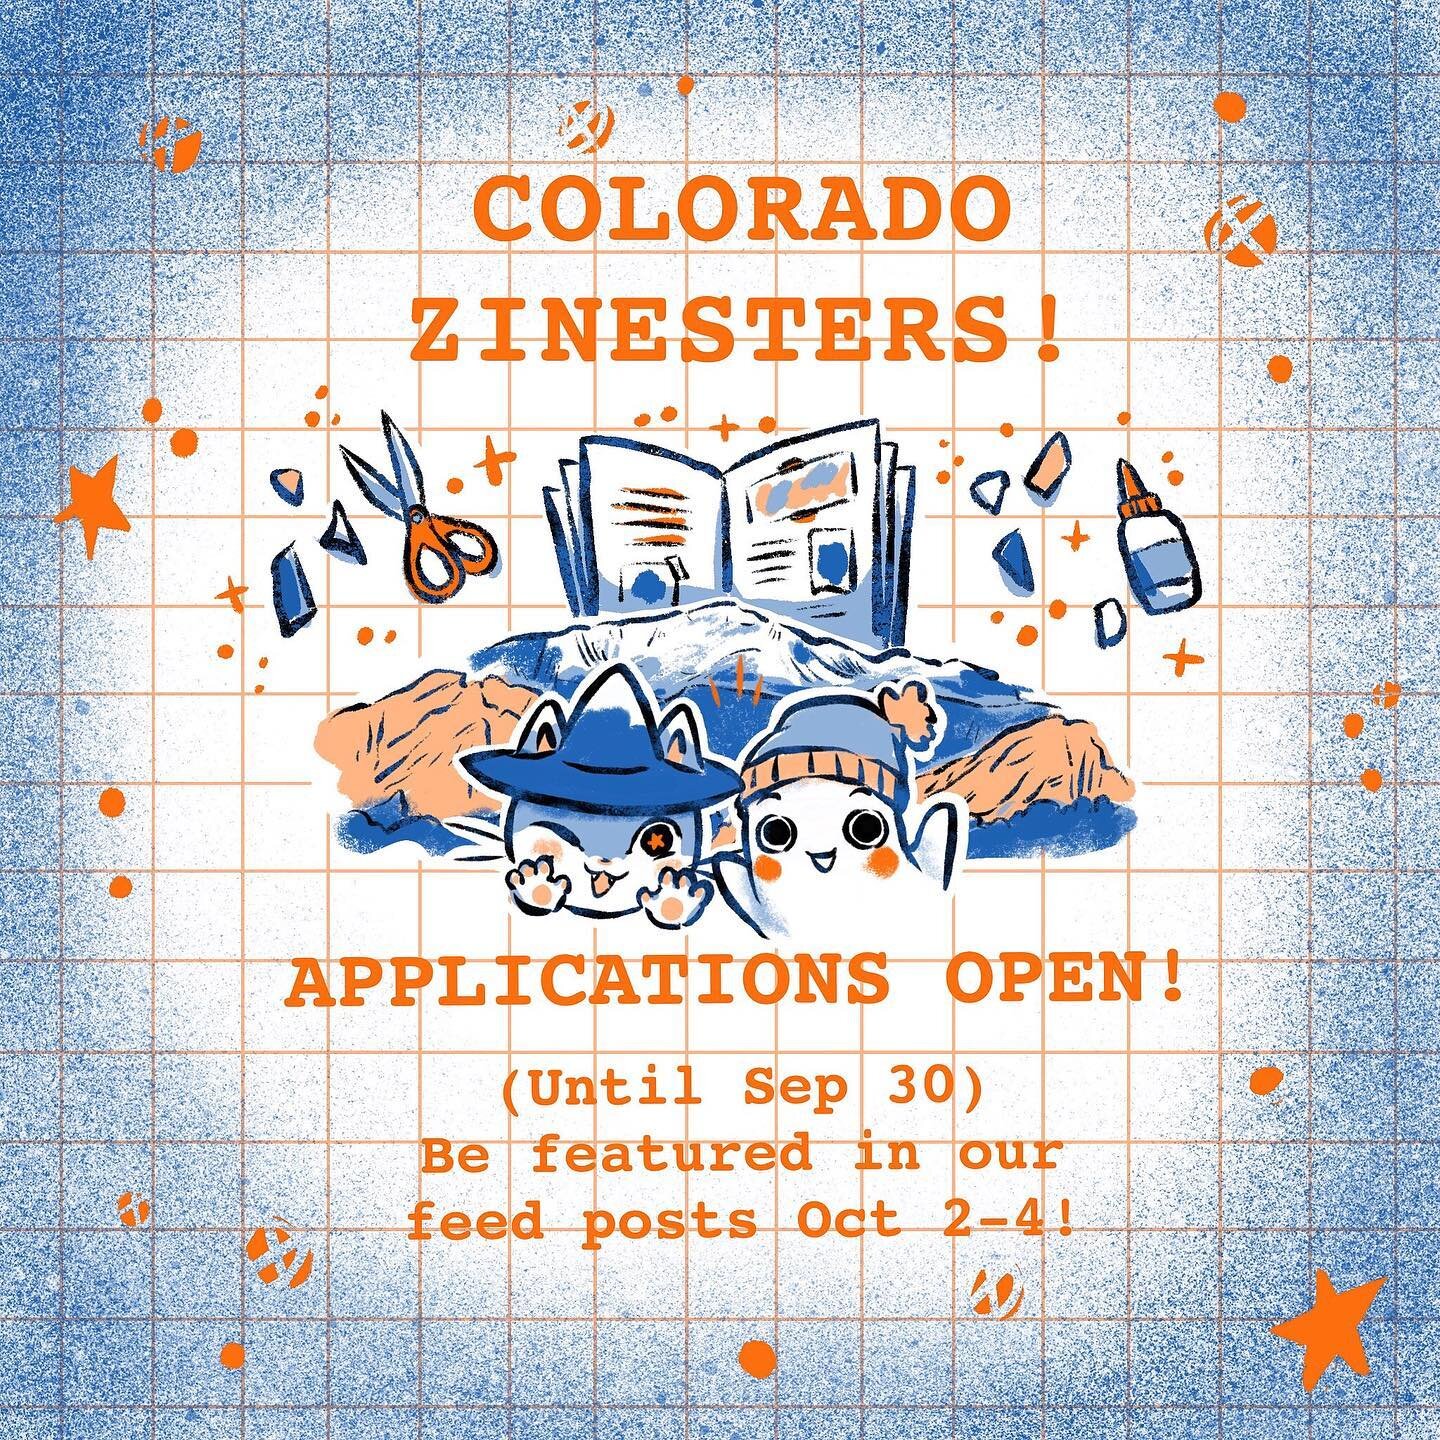 Colorado zinesters, artists, independent publishers, and creators!! Fill out @pikespeakzinefest &lsquo;s Feature Form to have your work shared on our website and social media feed posts on Oct 2-4. Applications are open until 9/30, and there is no fe